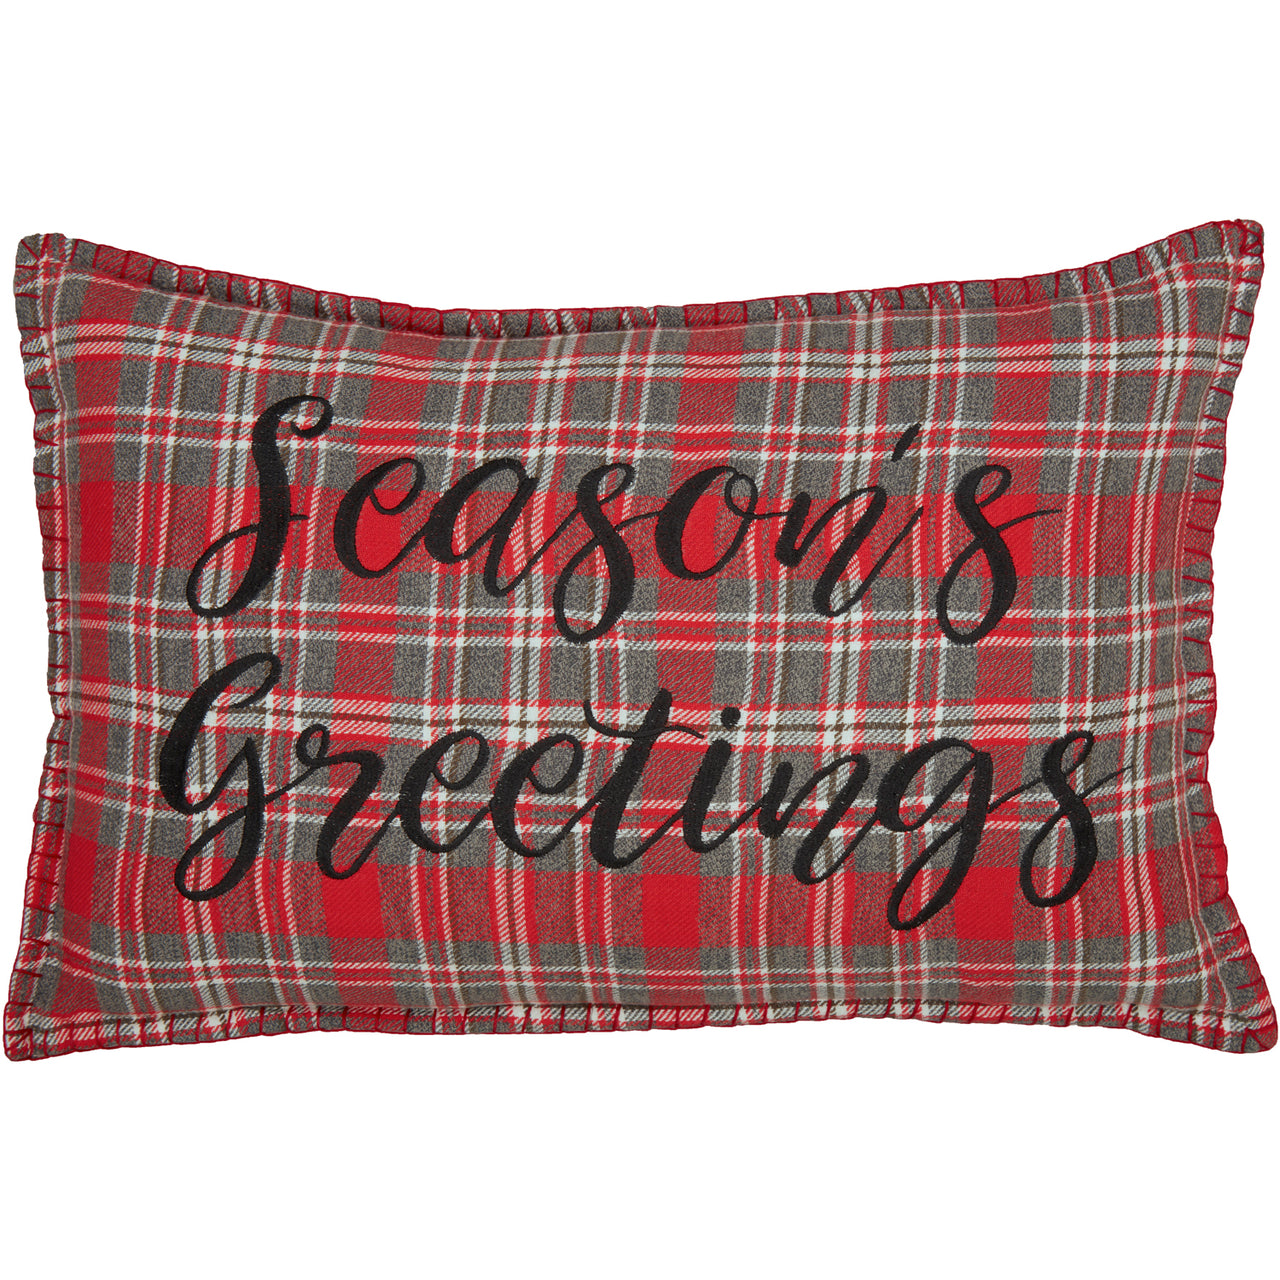 Anderson Season's Greetings Pillow 14x22 VHC Brands